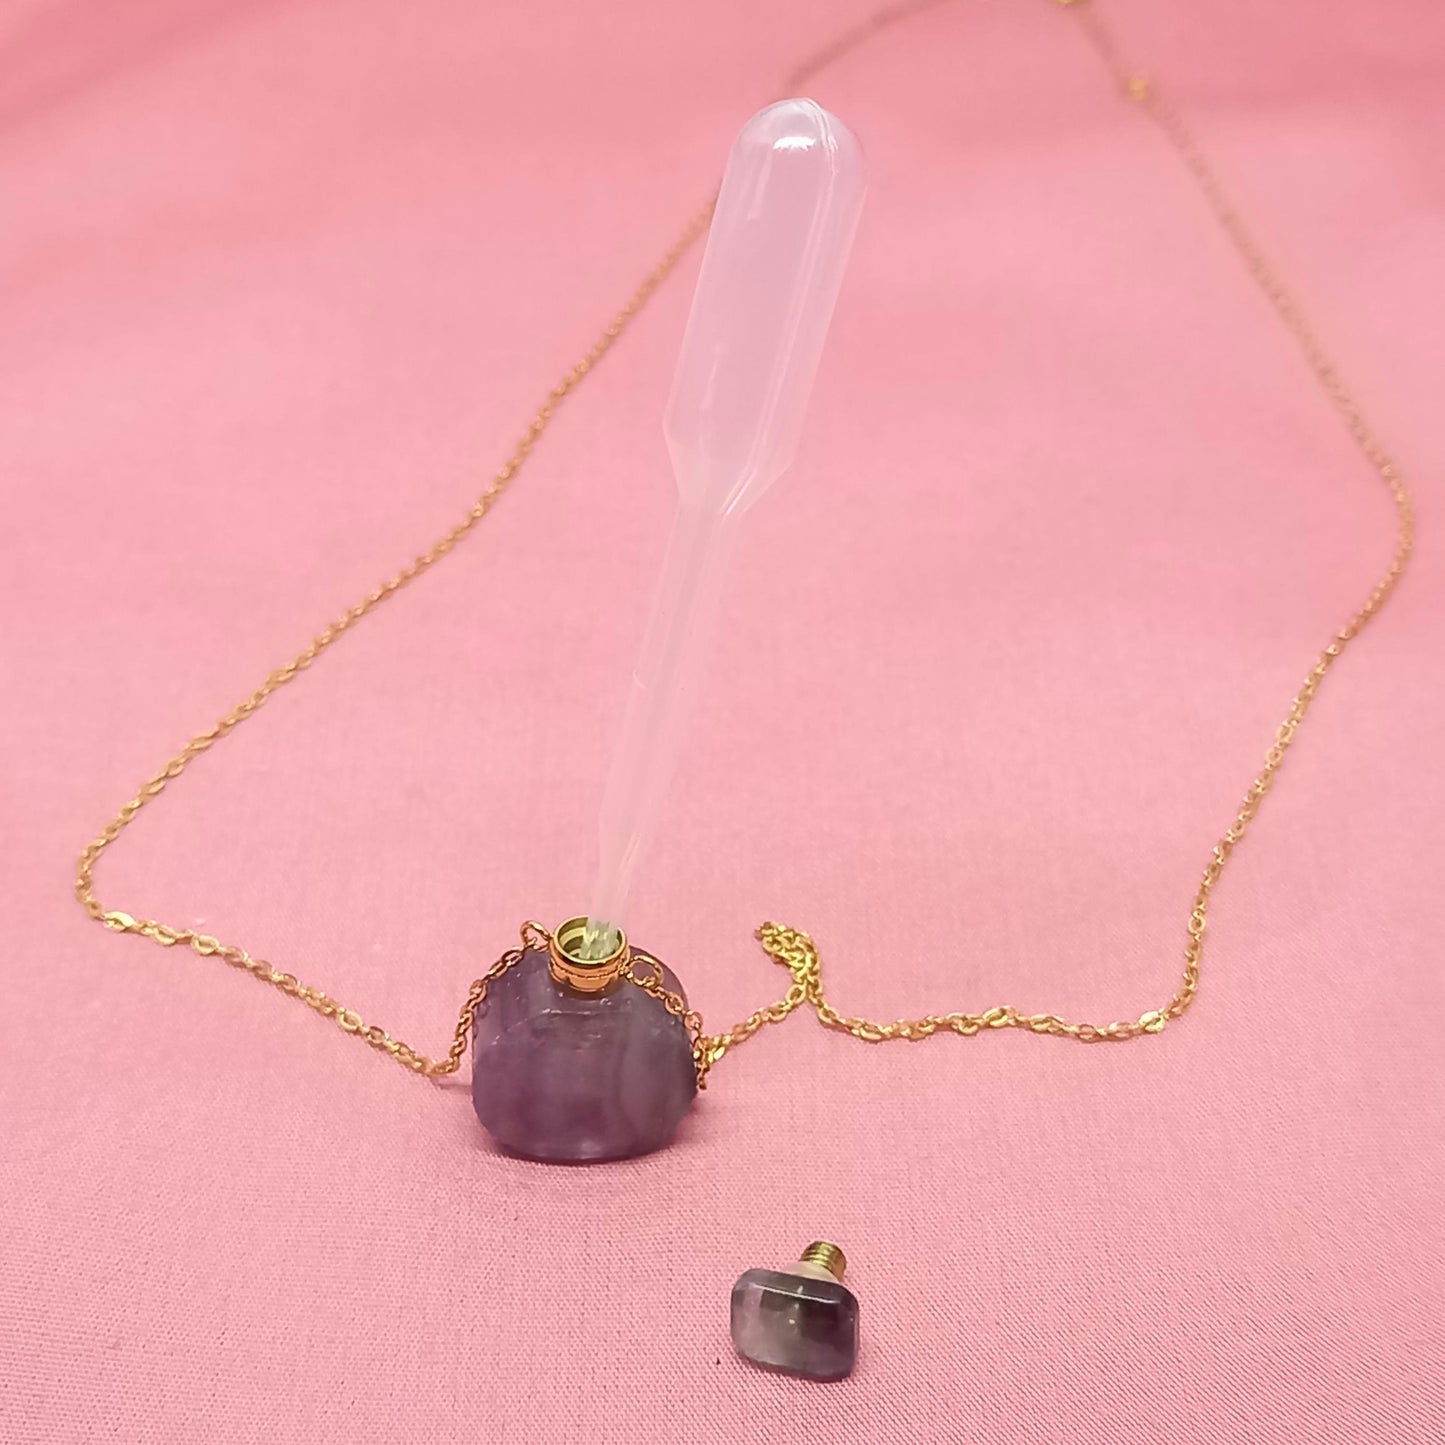 VIOLE PENDANT IN NATURAL FLUORITE STONES + STAINLESS STEEL NECKLACE